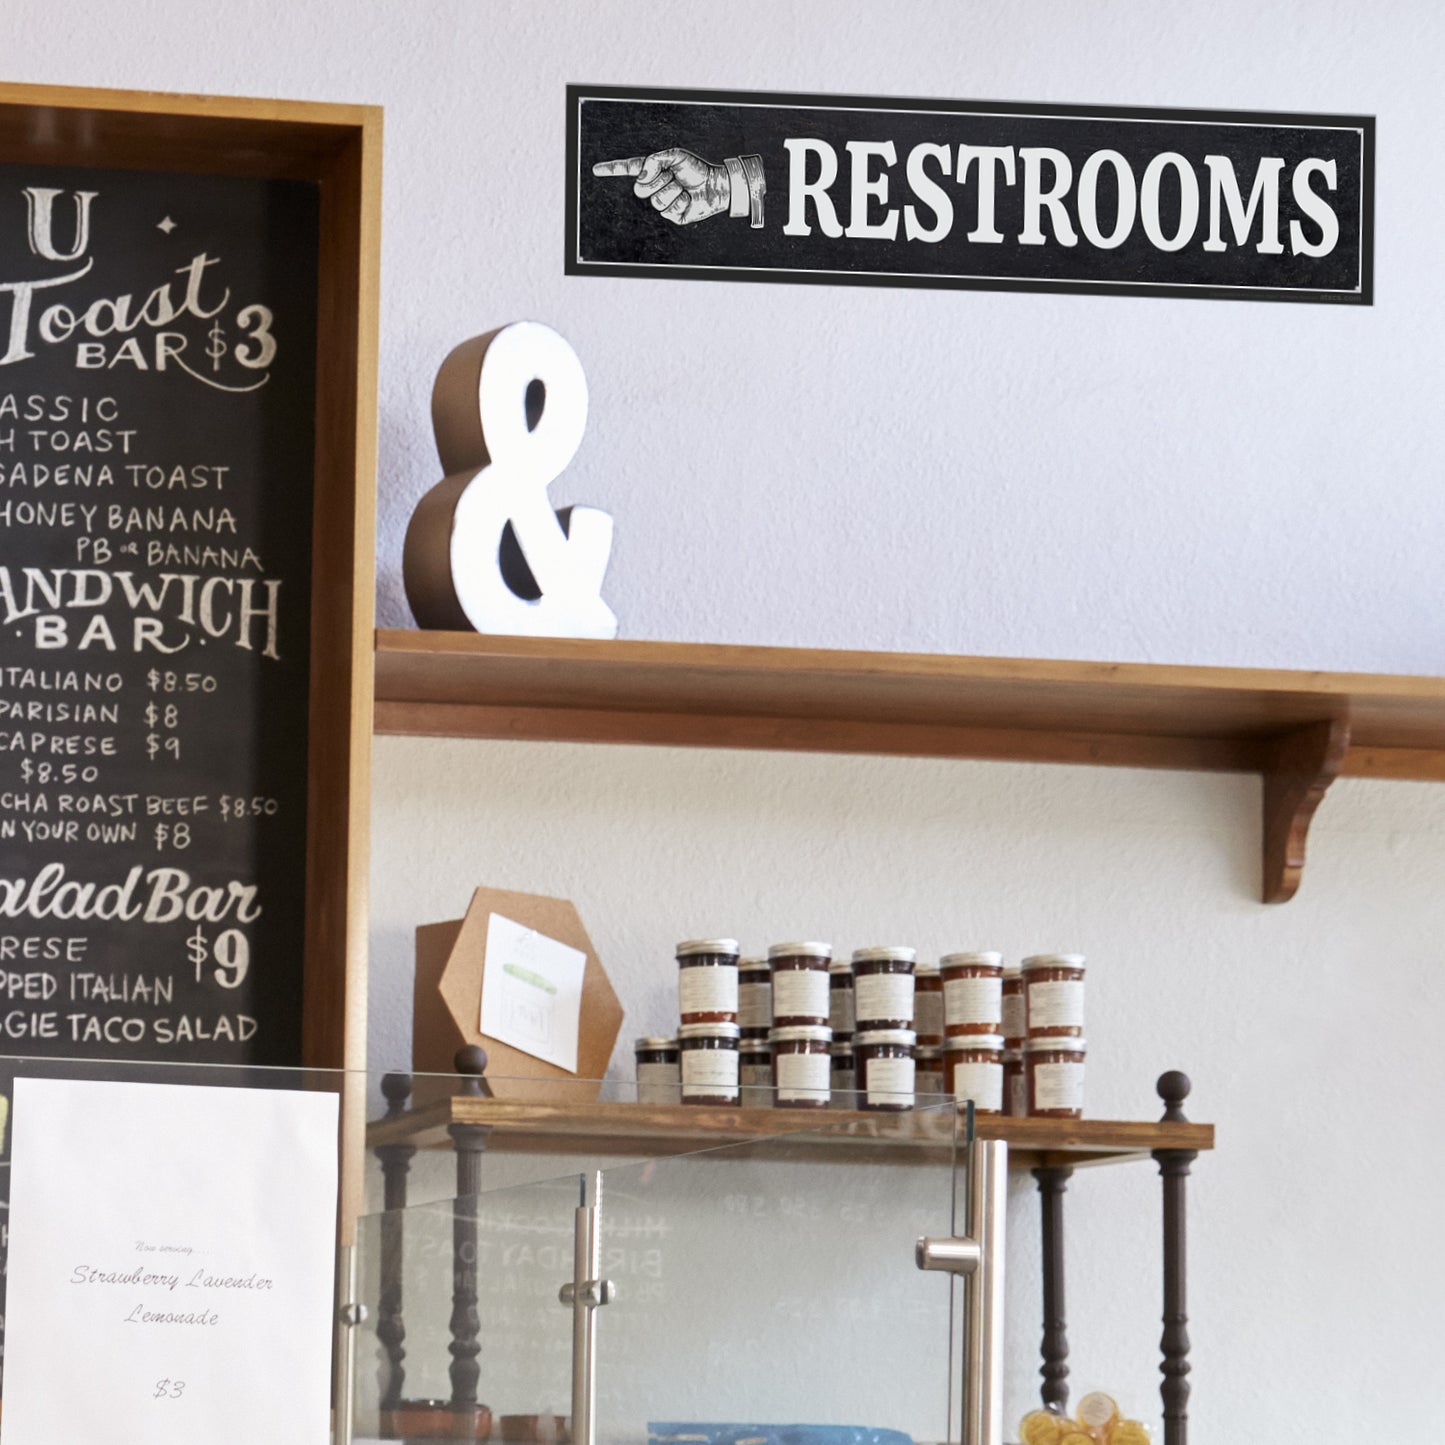 ATX CUSTOM SIGNS - Dark Rustic Restroom Hand Pointing Signs - Double Sided Left or Right Pointing 2 Signs Pack